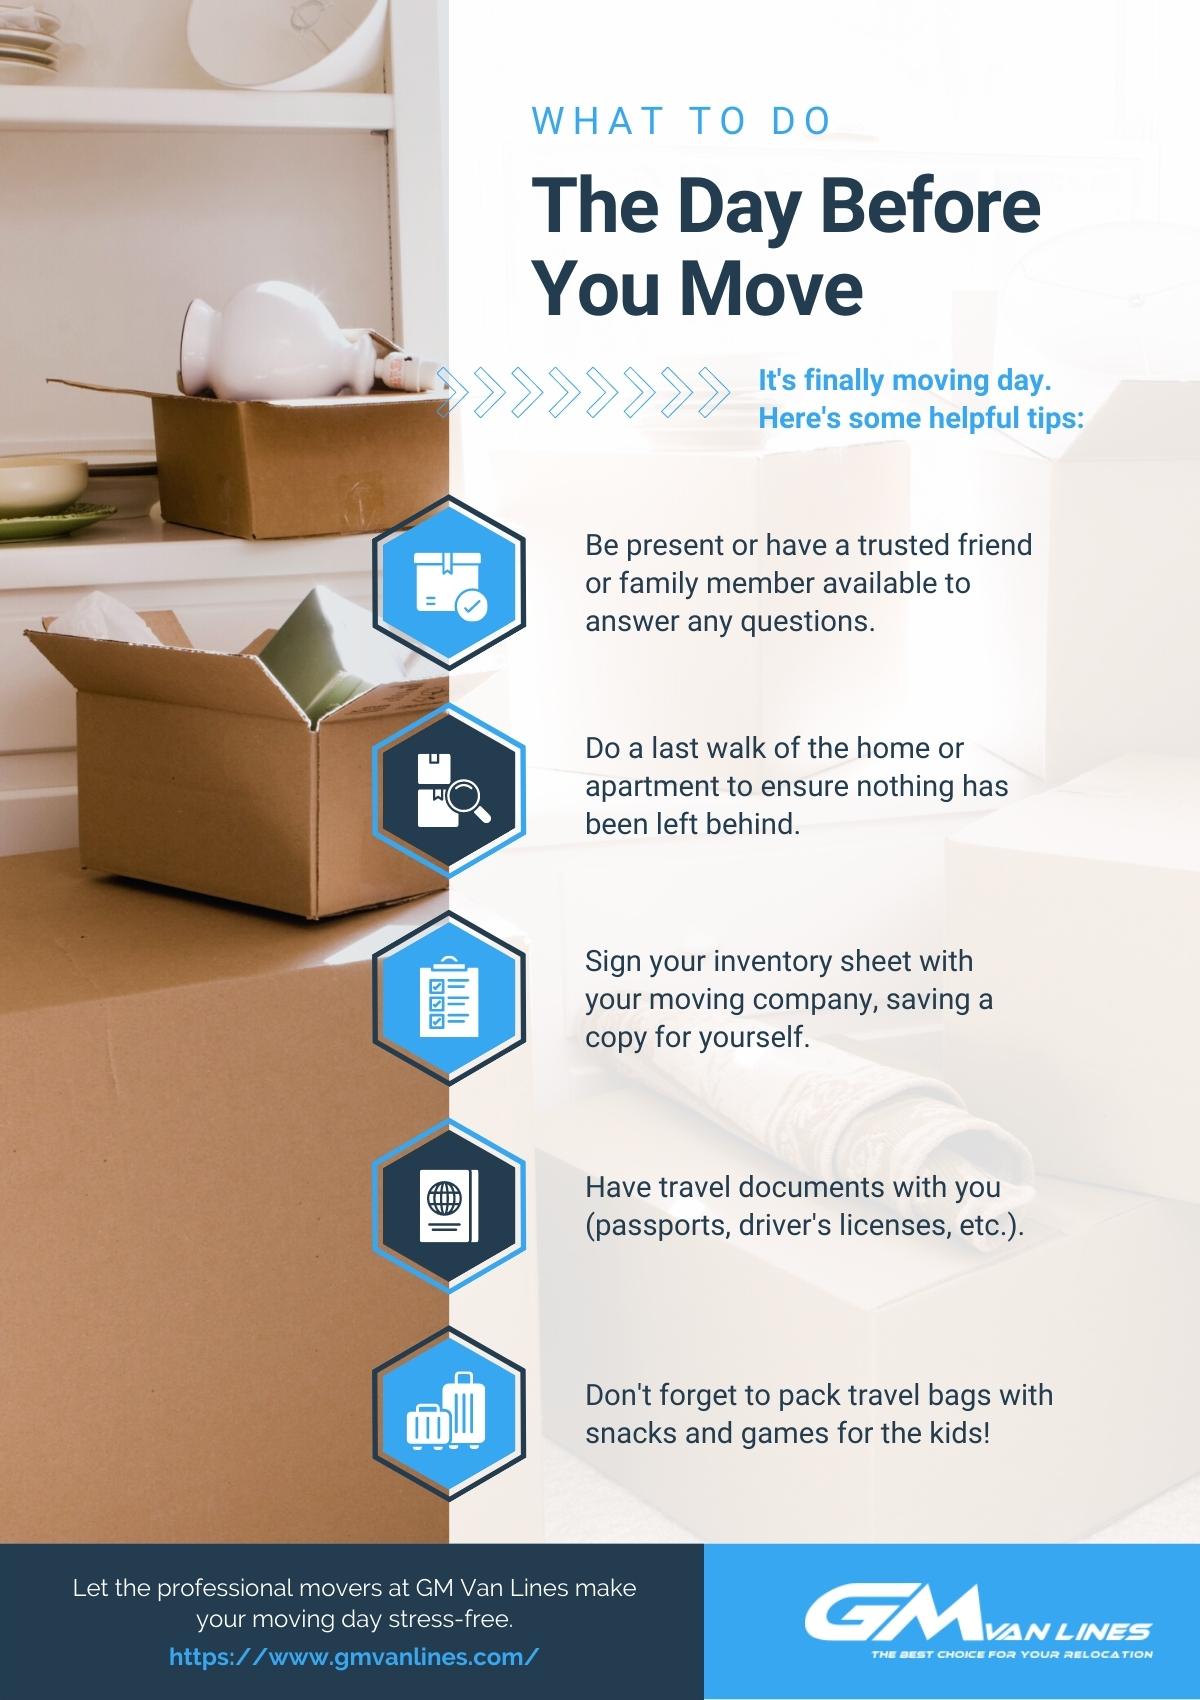 What To Do The Day Before You Move